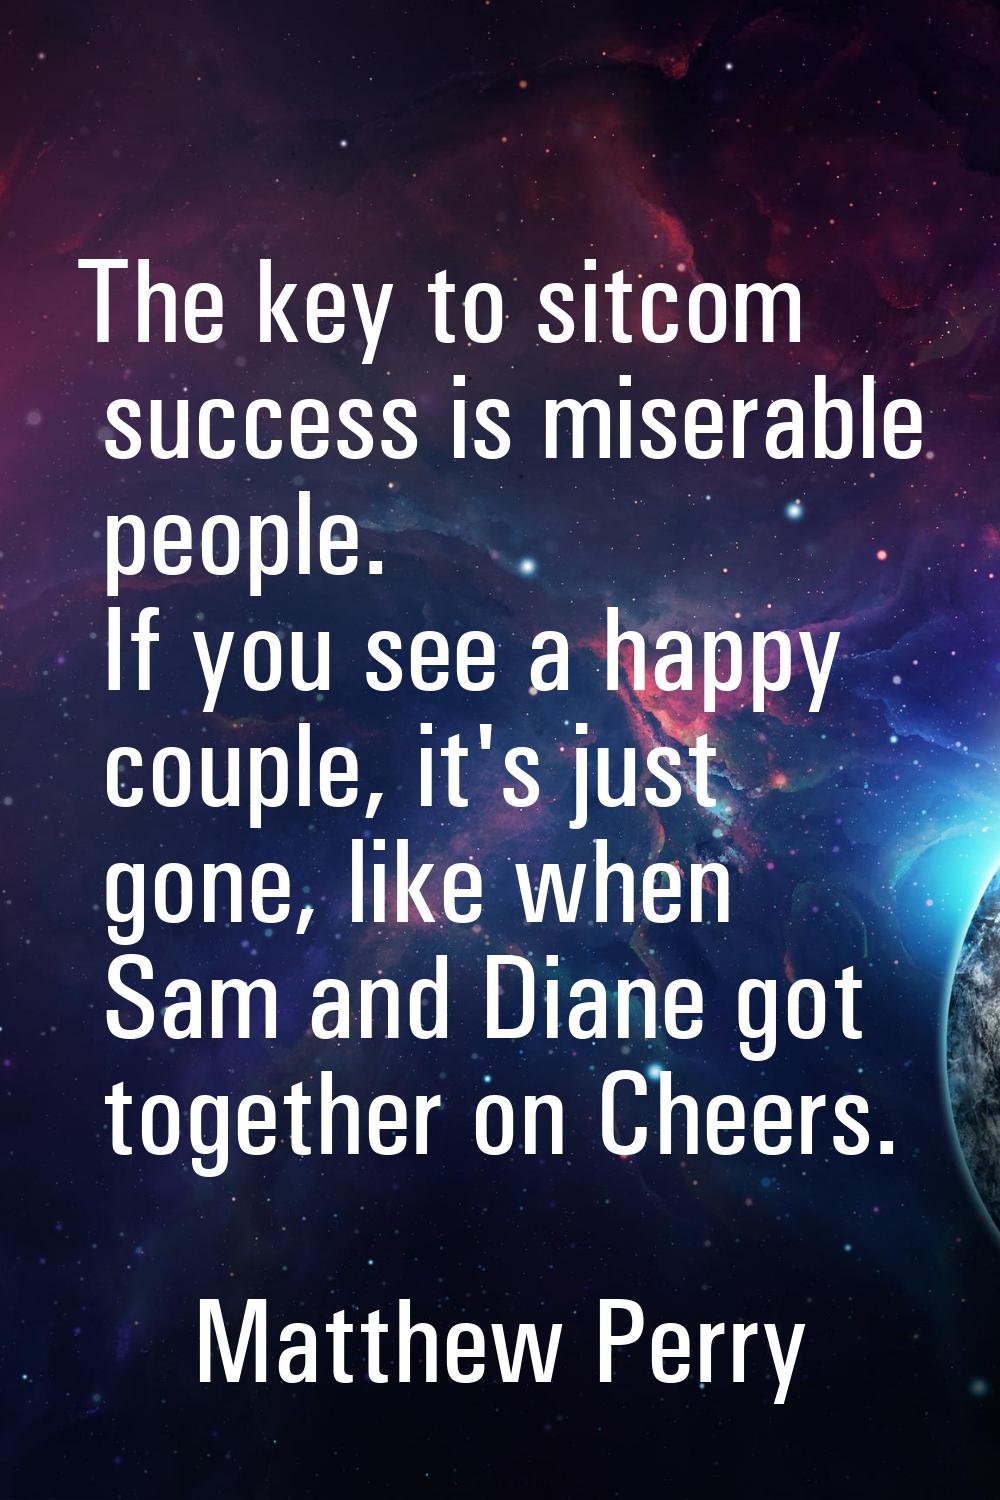 The key to sitcom success is miserable people. If you see a happy couple, it's just gone, like when